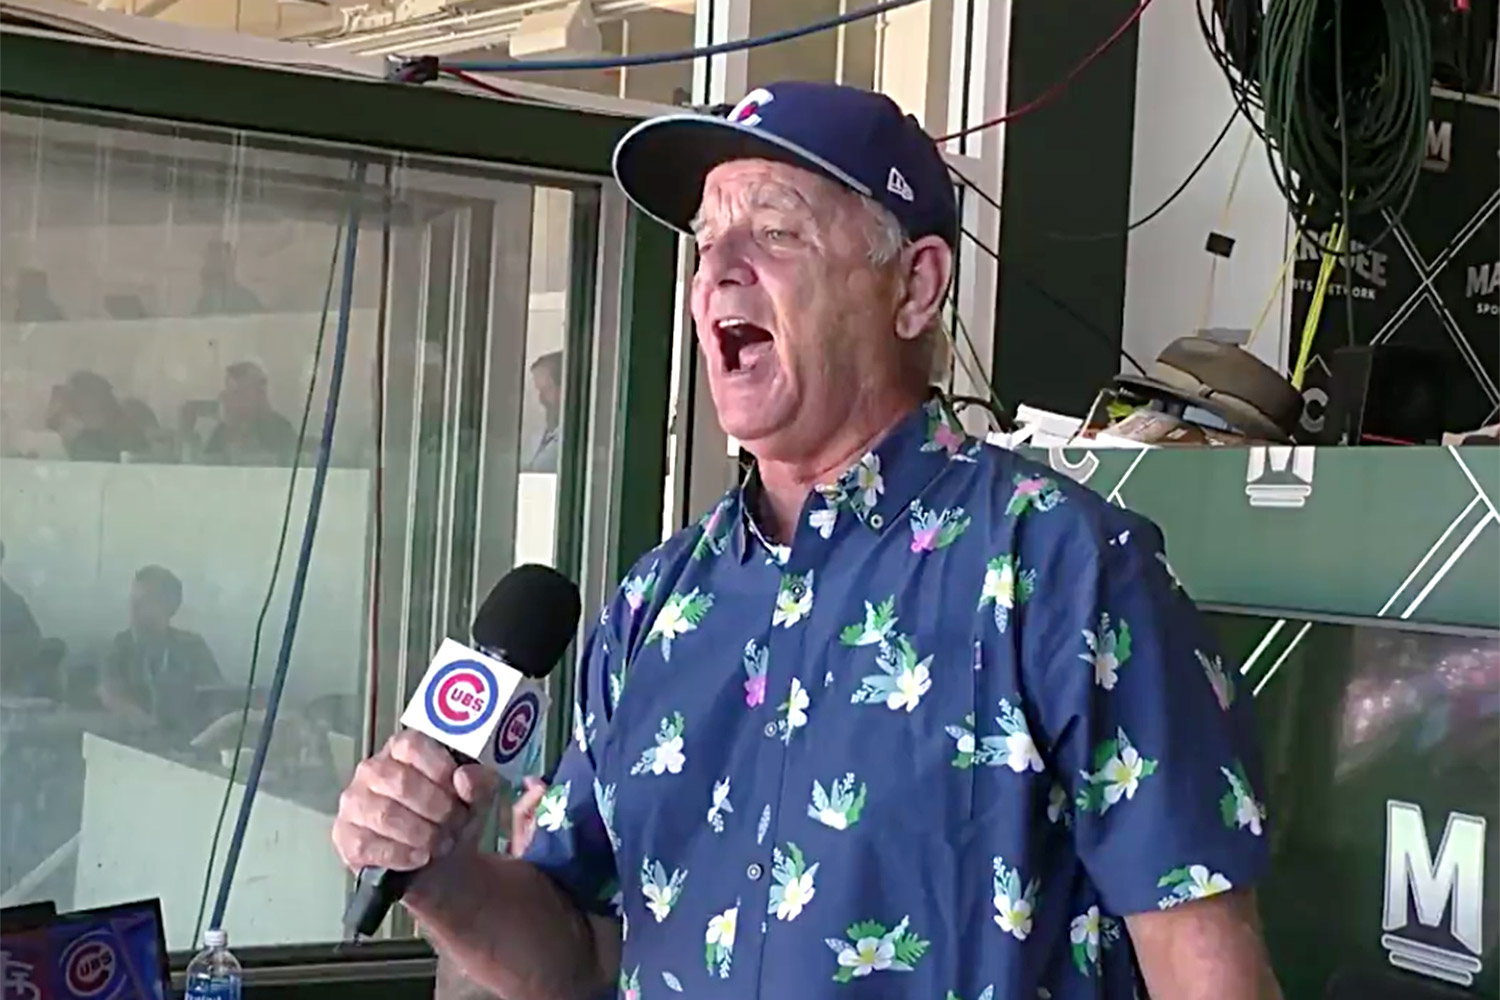 Bill Murray Sings 'Take Me Out to the Ball Game' as He Welcomes Chicago Cubs Fans Back at Wrigley Field
https://twitter.com/Cubs/status/1403457685815808004